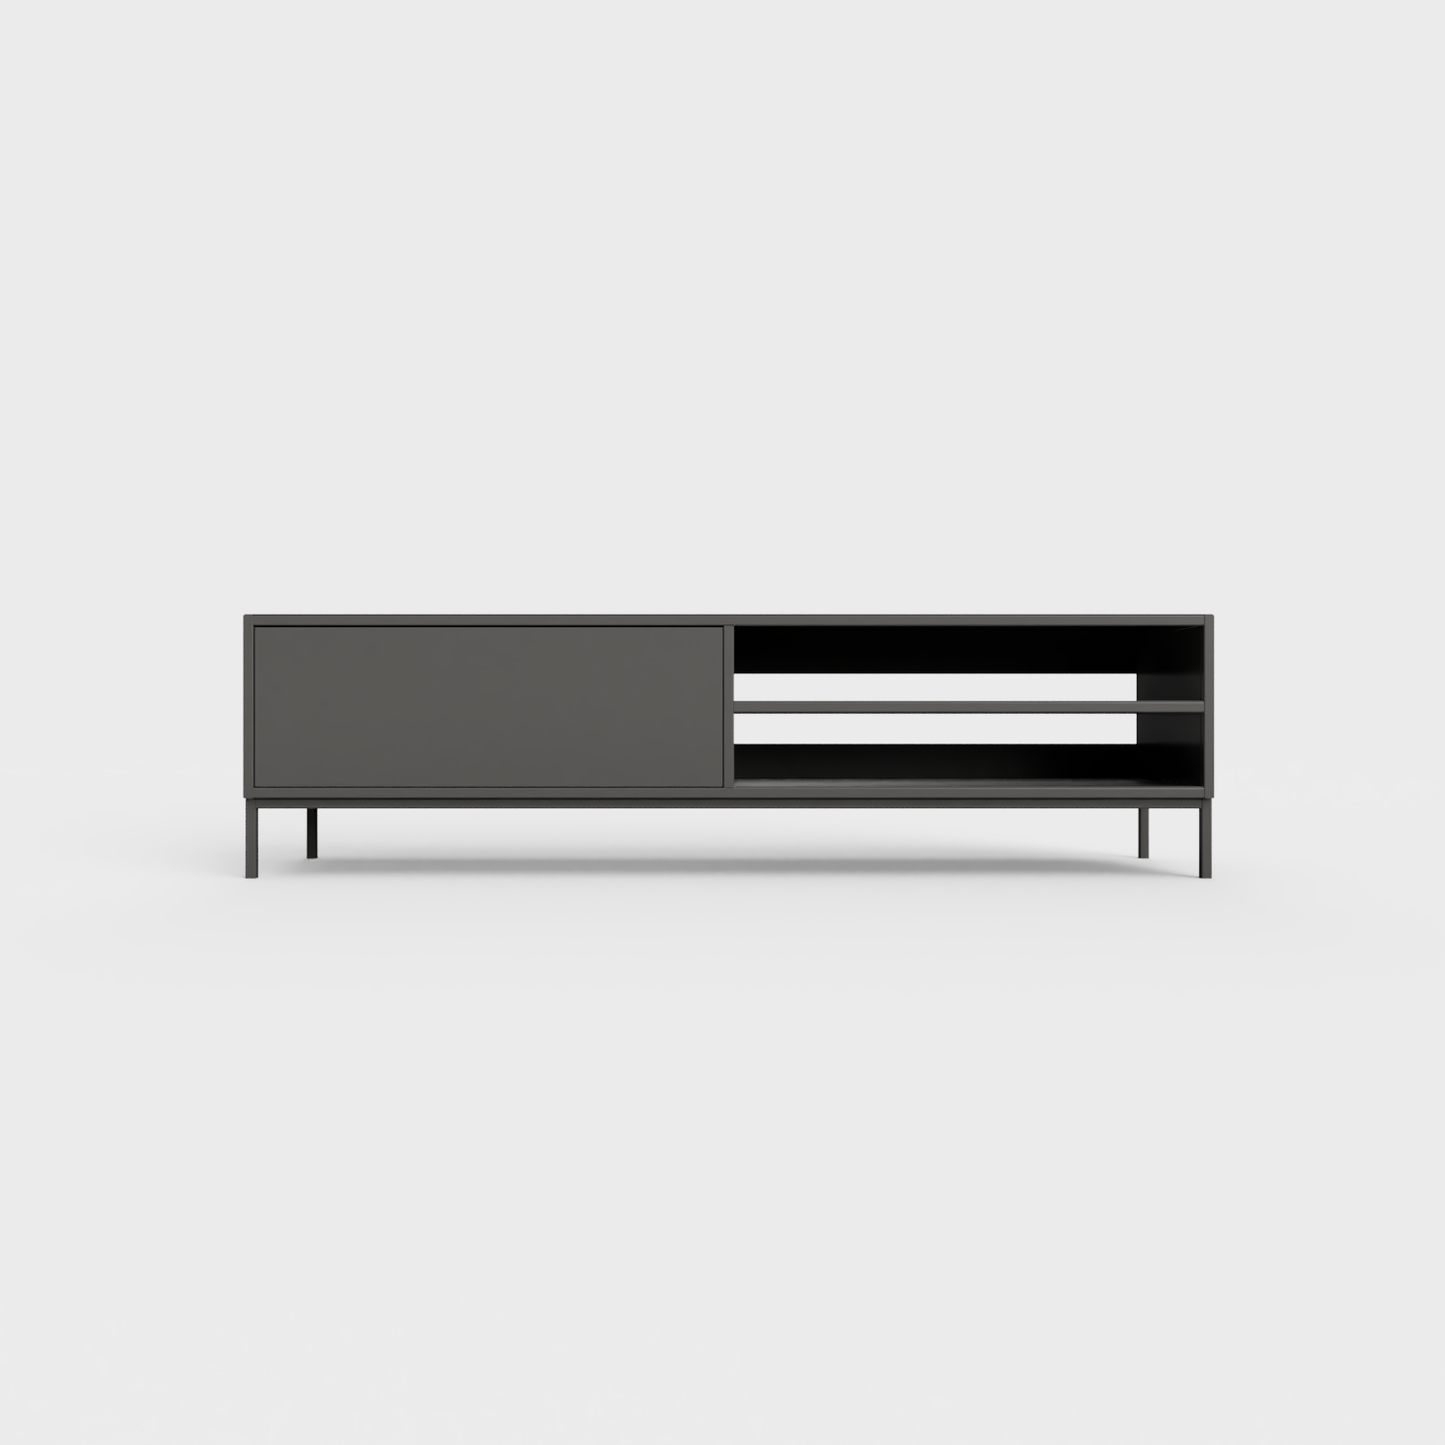 Prunus 02 Lowboard in Anthracite color, powder-coated steel, elegant and modern piece of furniture for your living room